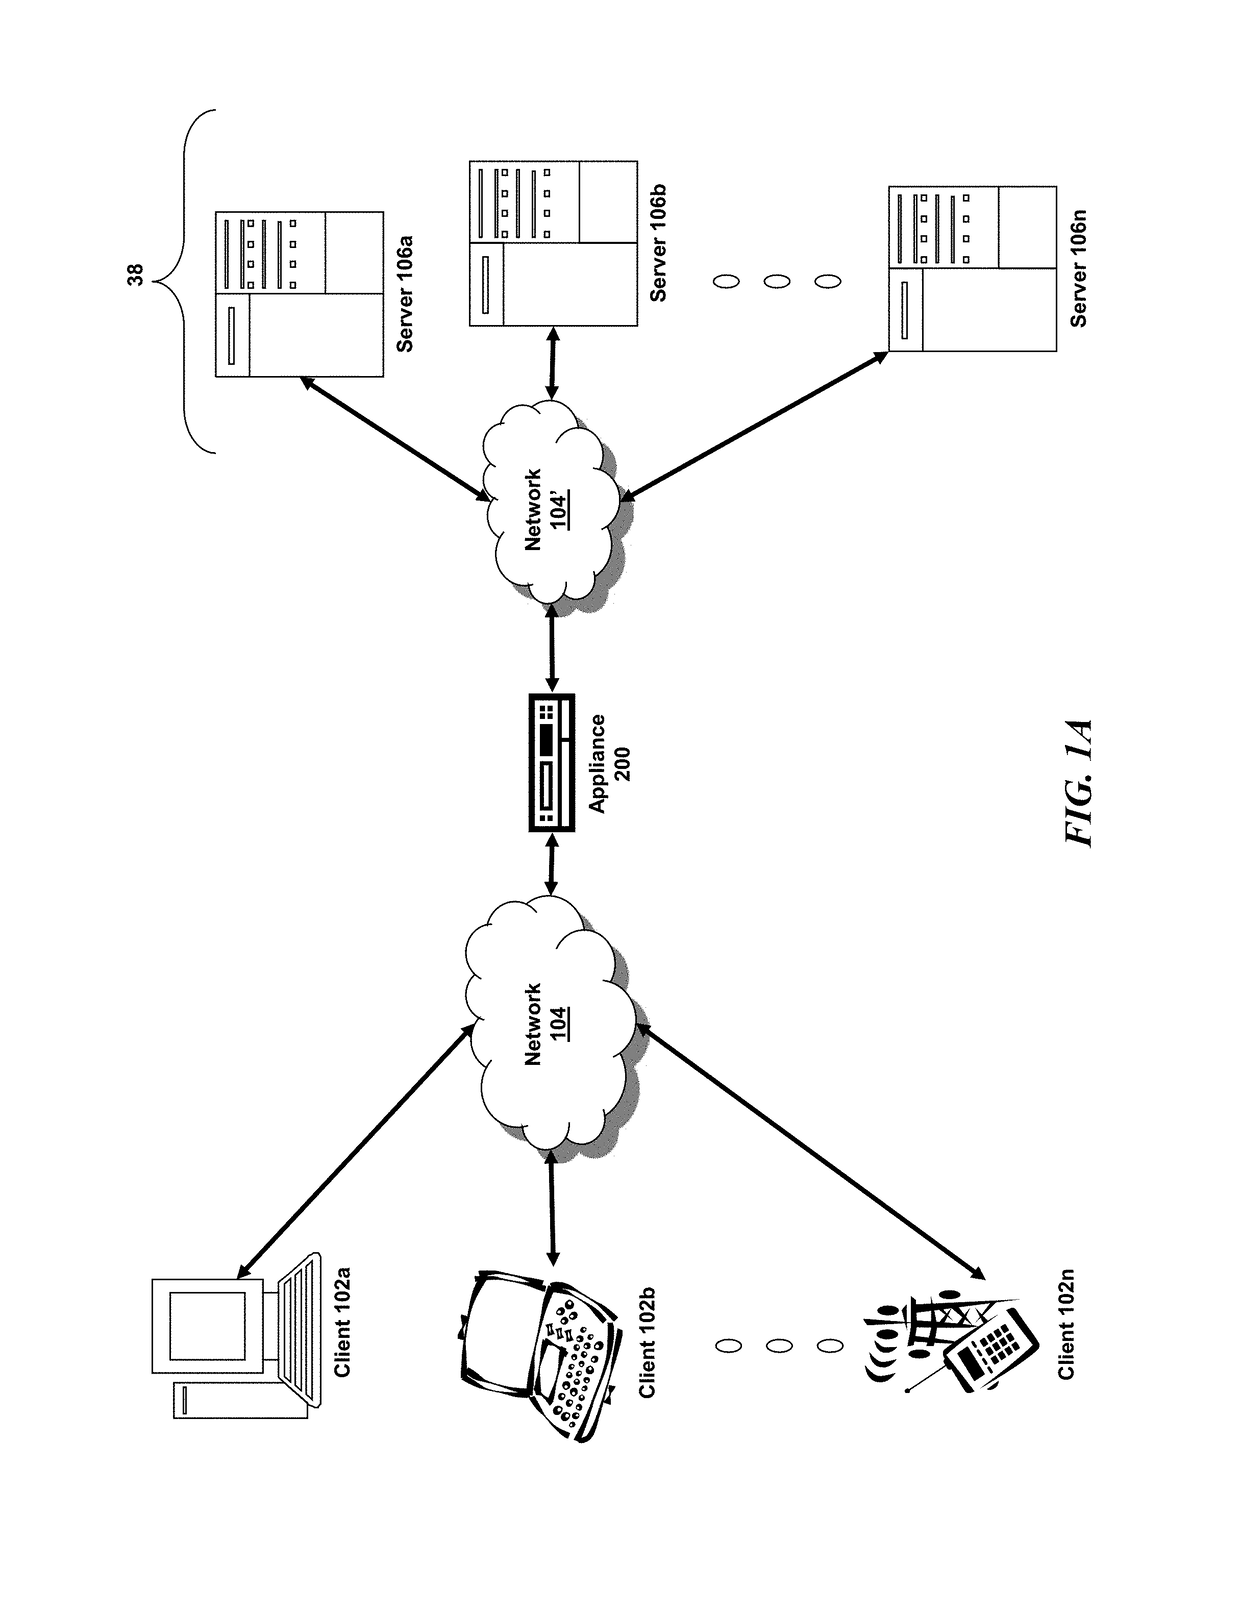 Systems and methods for securely and transparently proxying  saas applications through a cloud-hosted or on-premise network gateway for enhanced security and visibility